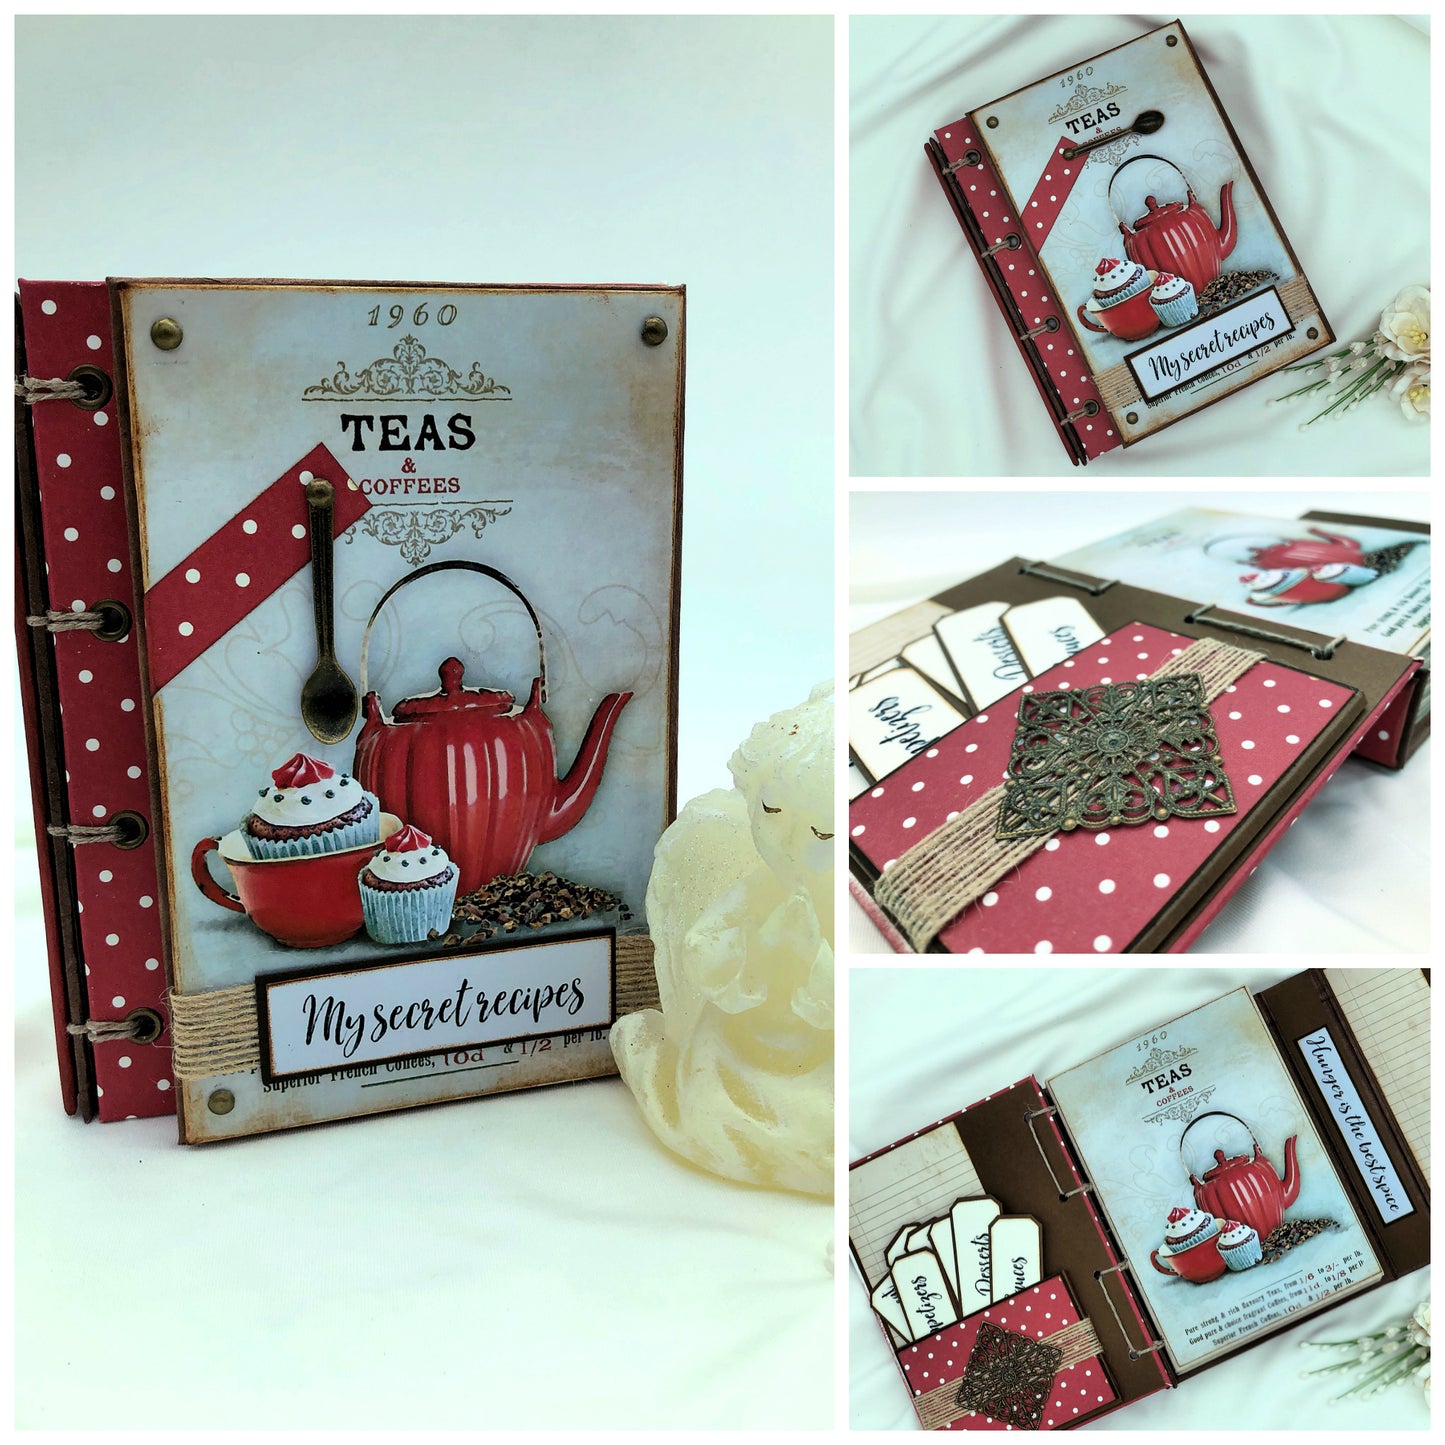 Recipe book with tea and cupcakes